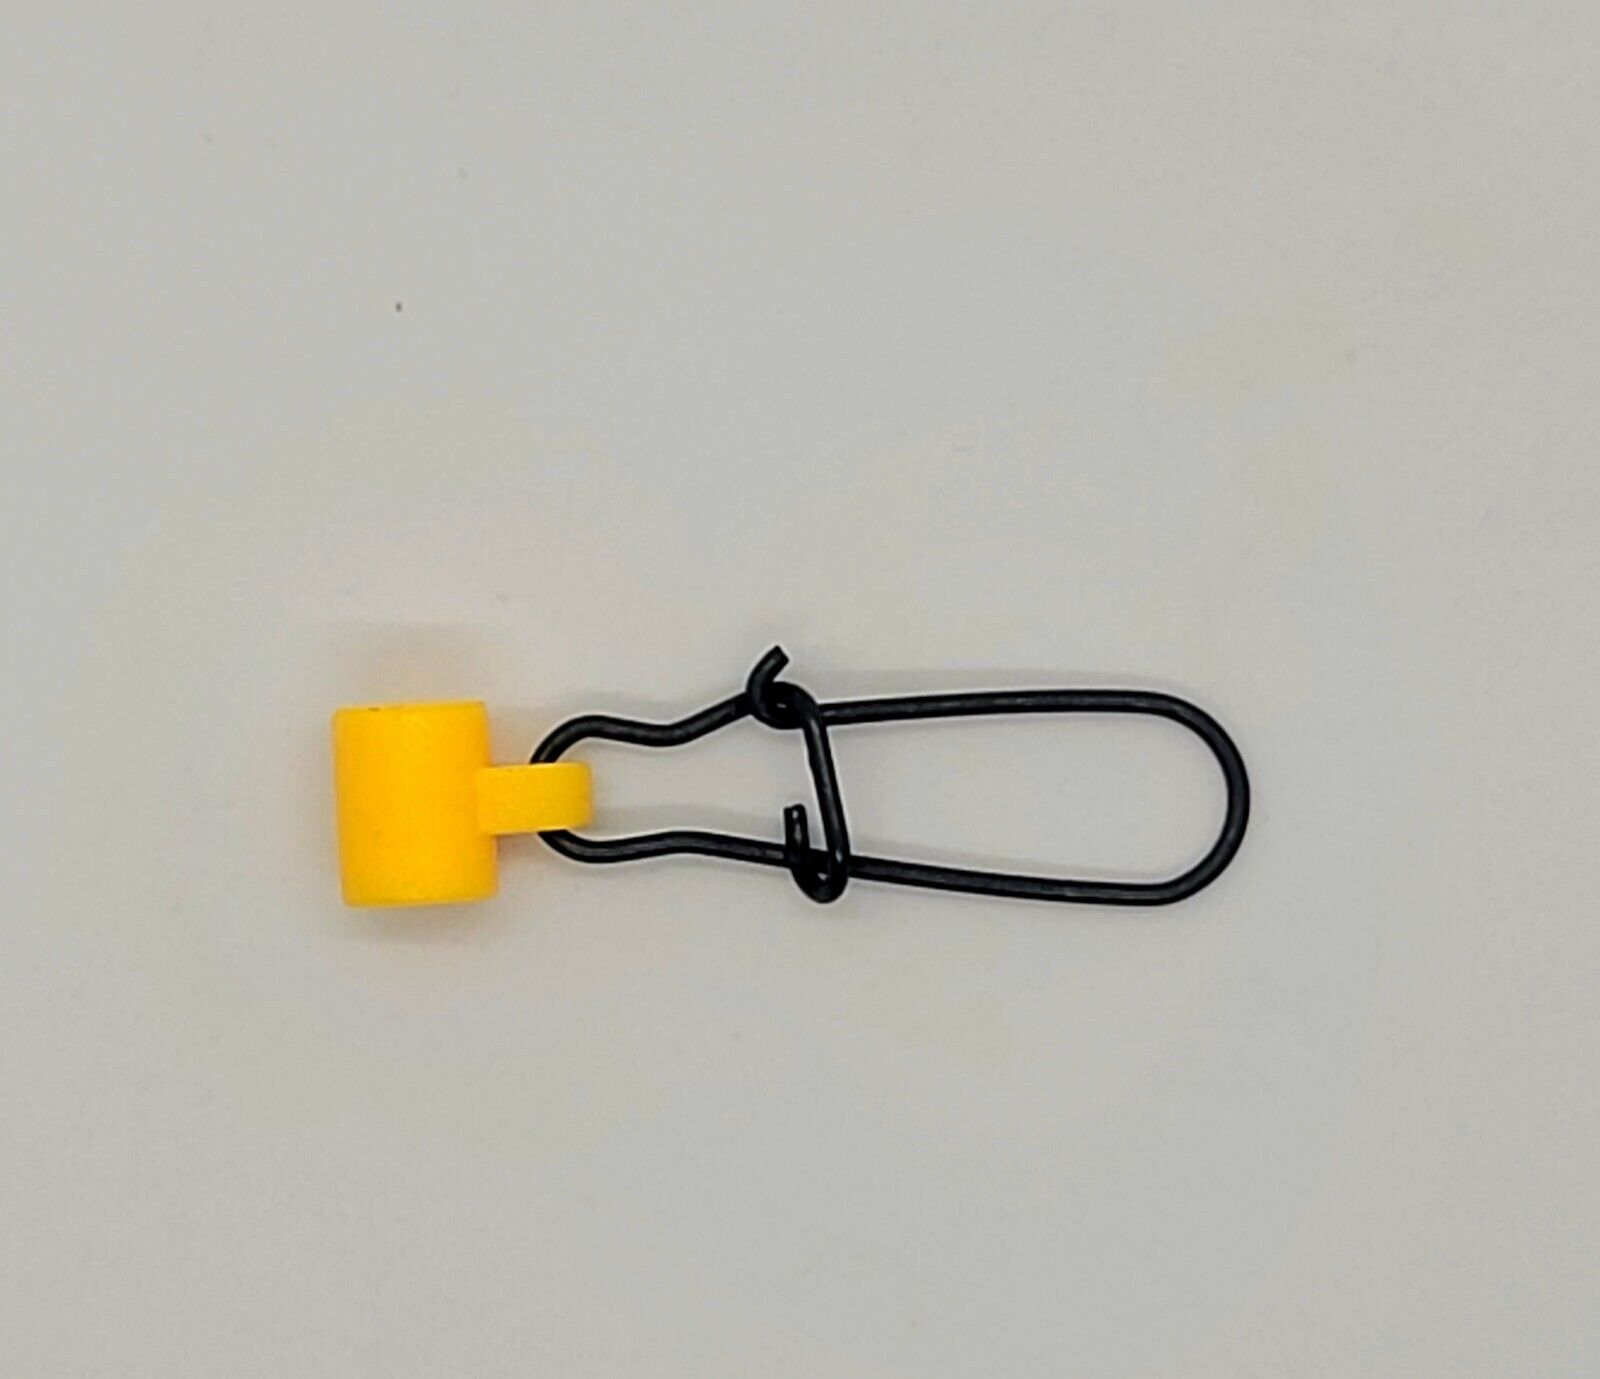 Fishing Terminal Tackle Sinker Slide with Duo Snap Lock Line Connector